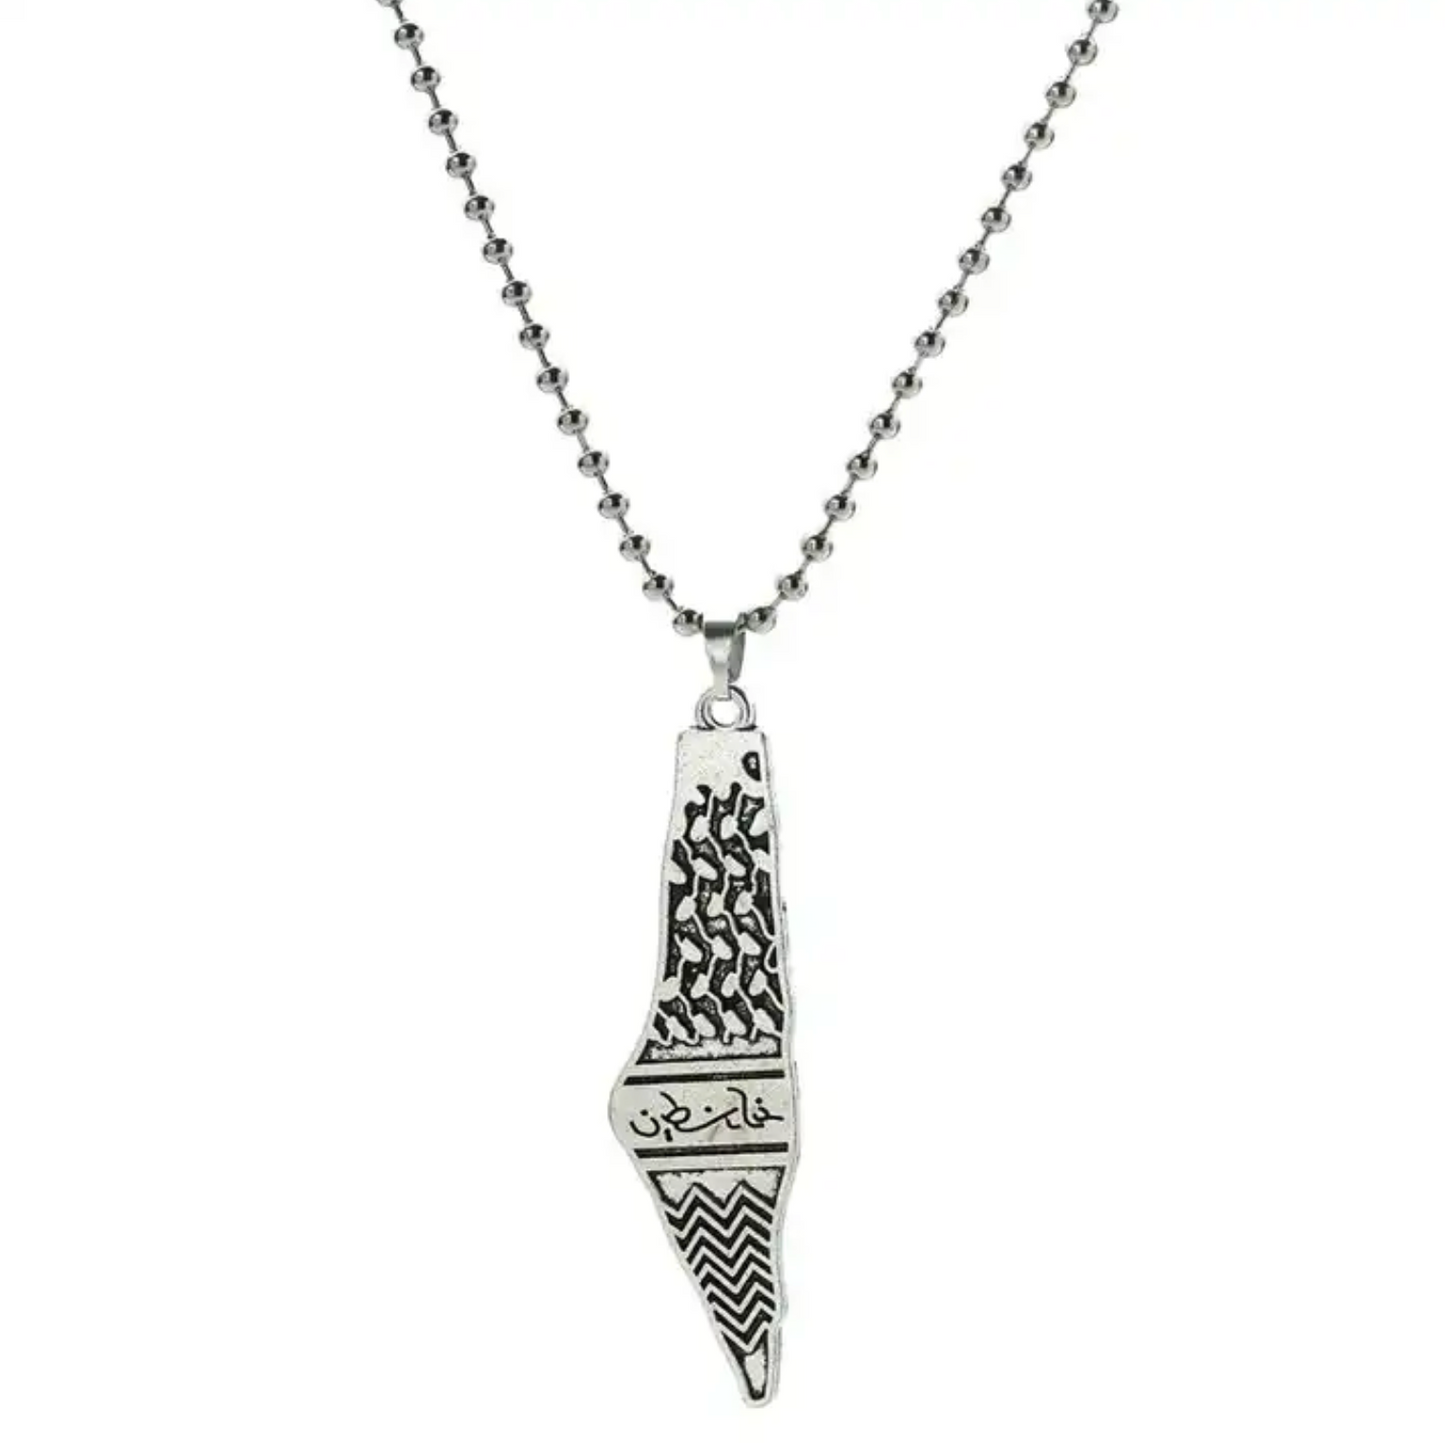 Palestine design necklace 100% proceeds will be donated.